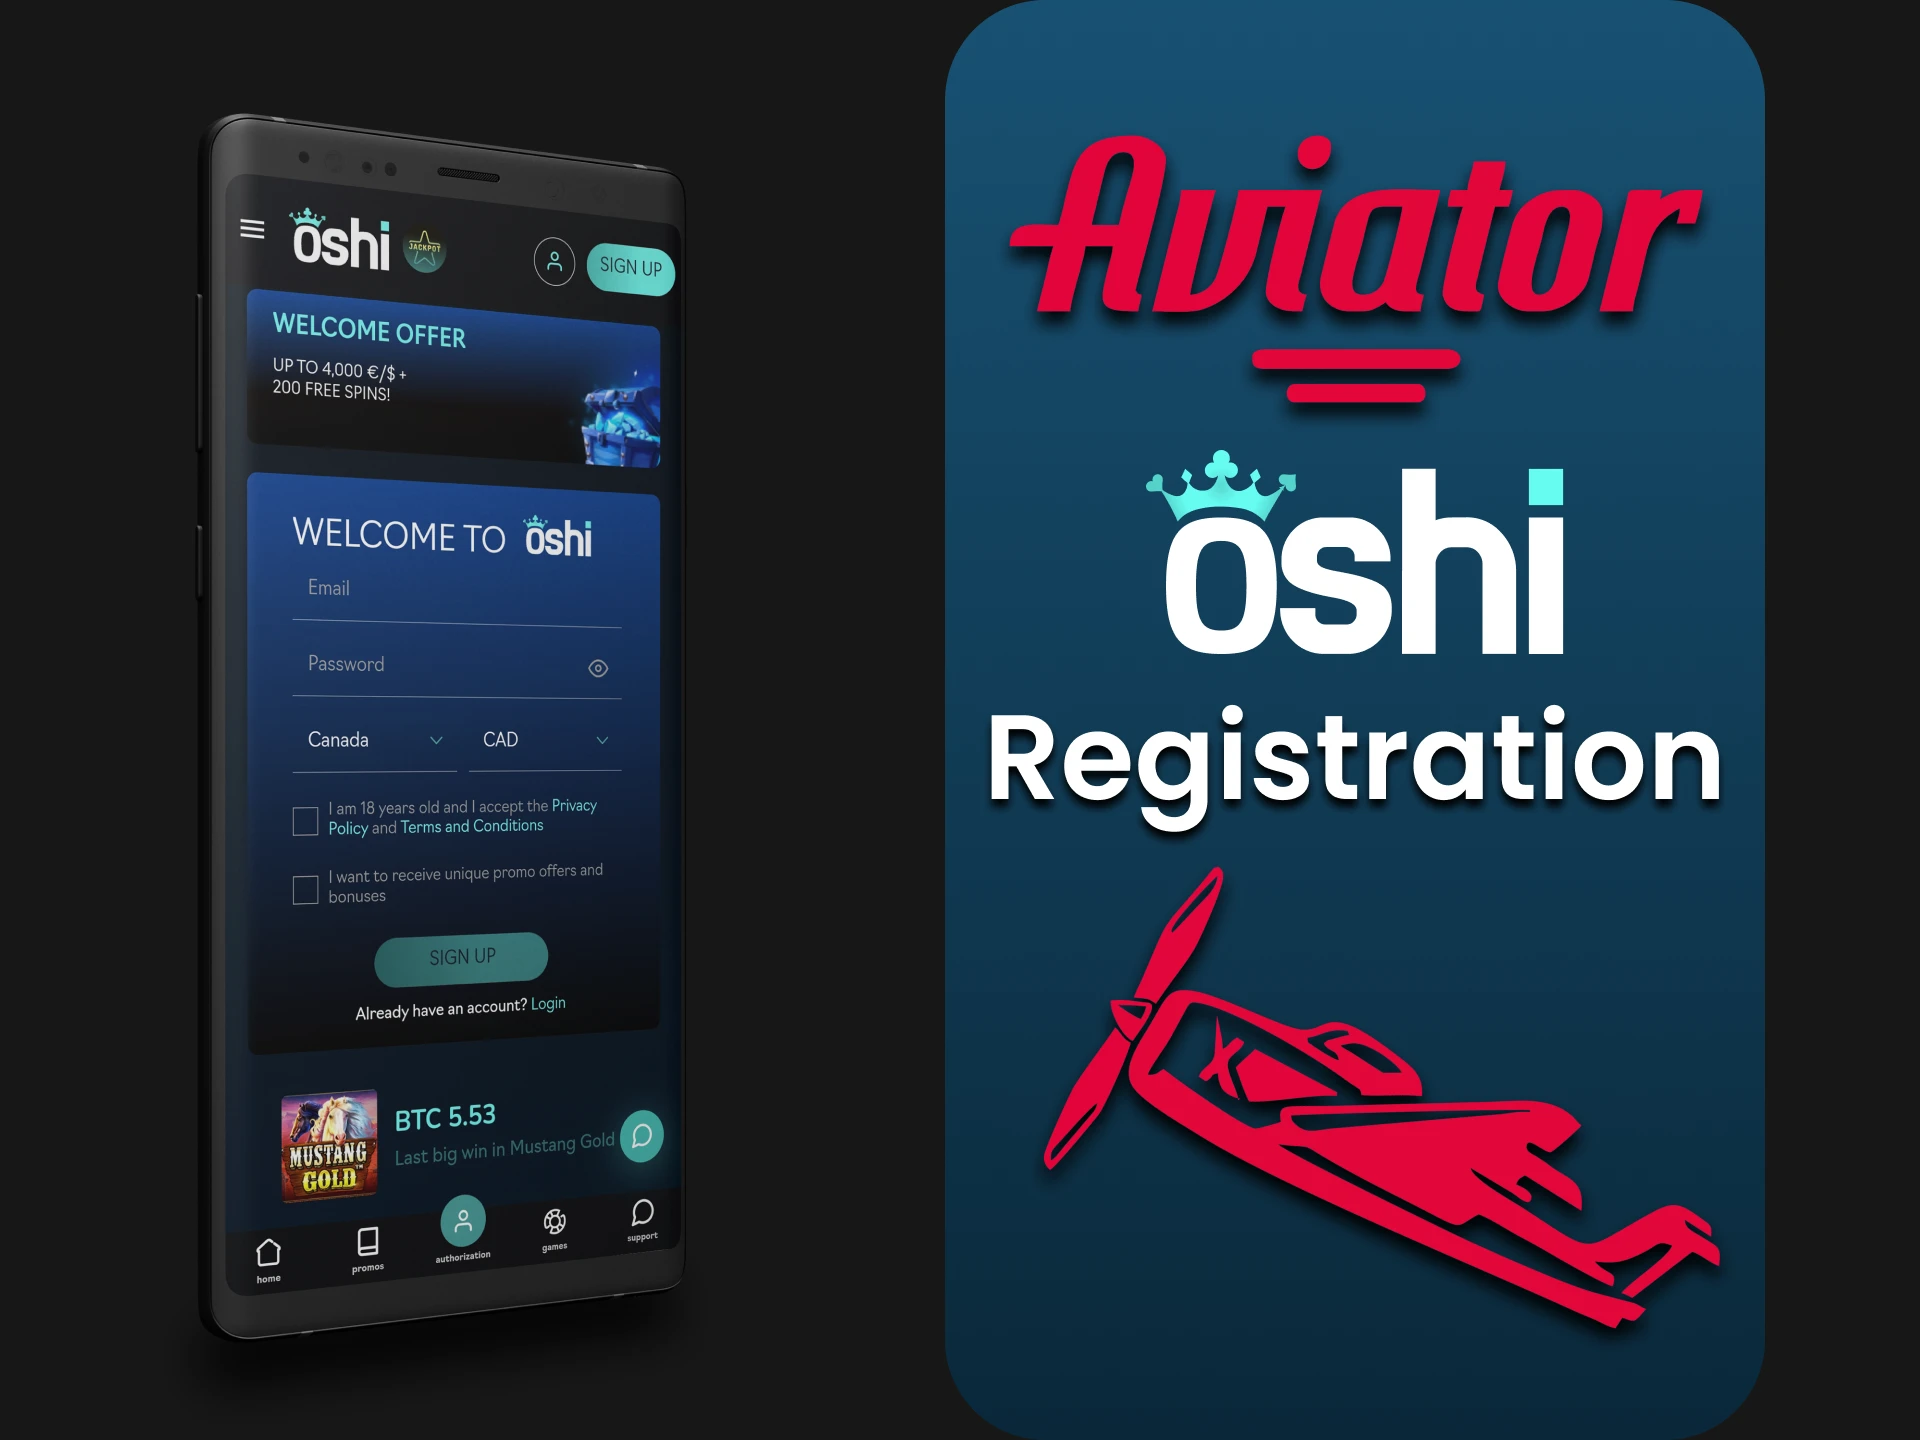 Sign up for the Oshi Casino app to play Aviator.